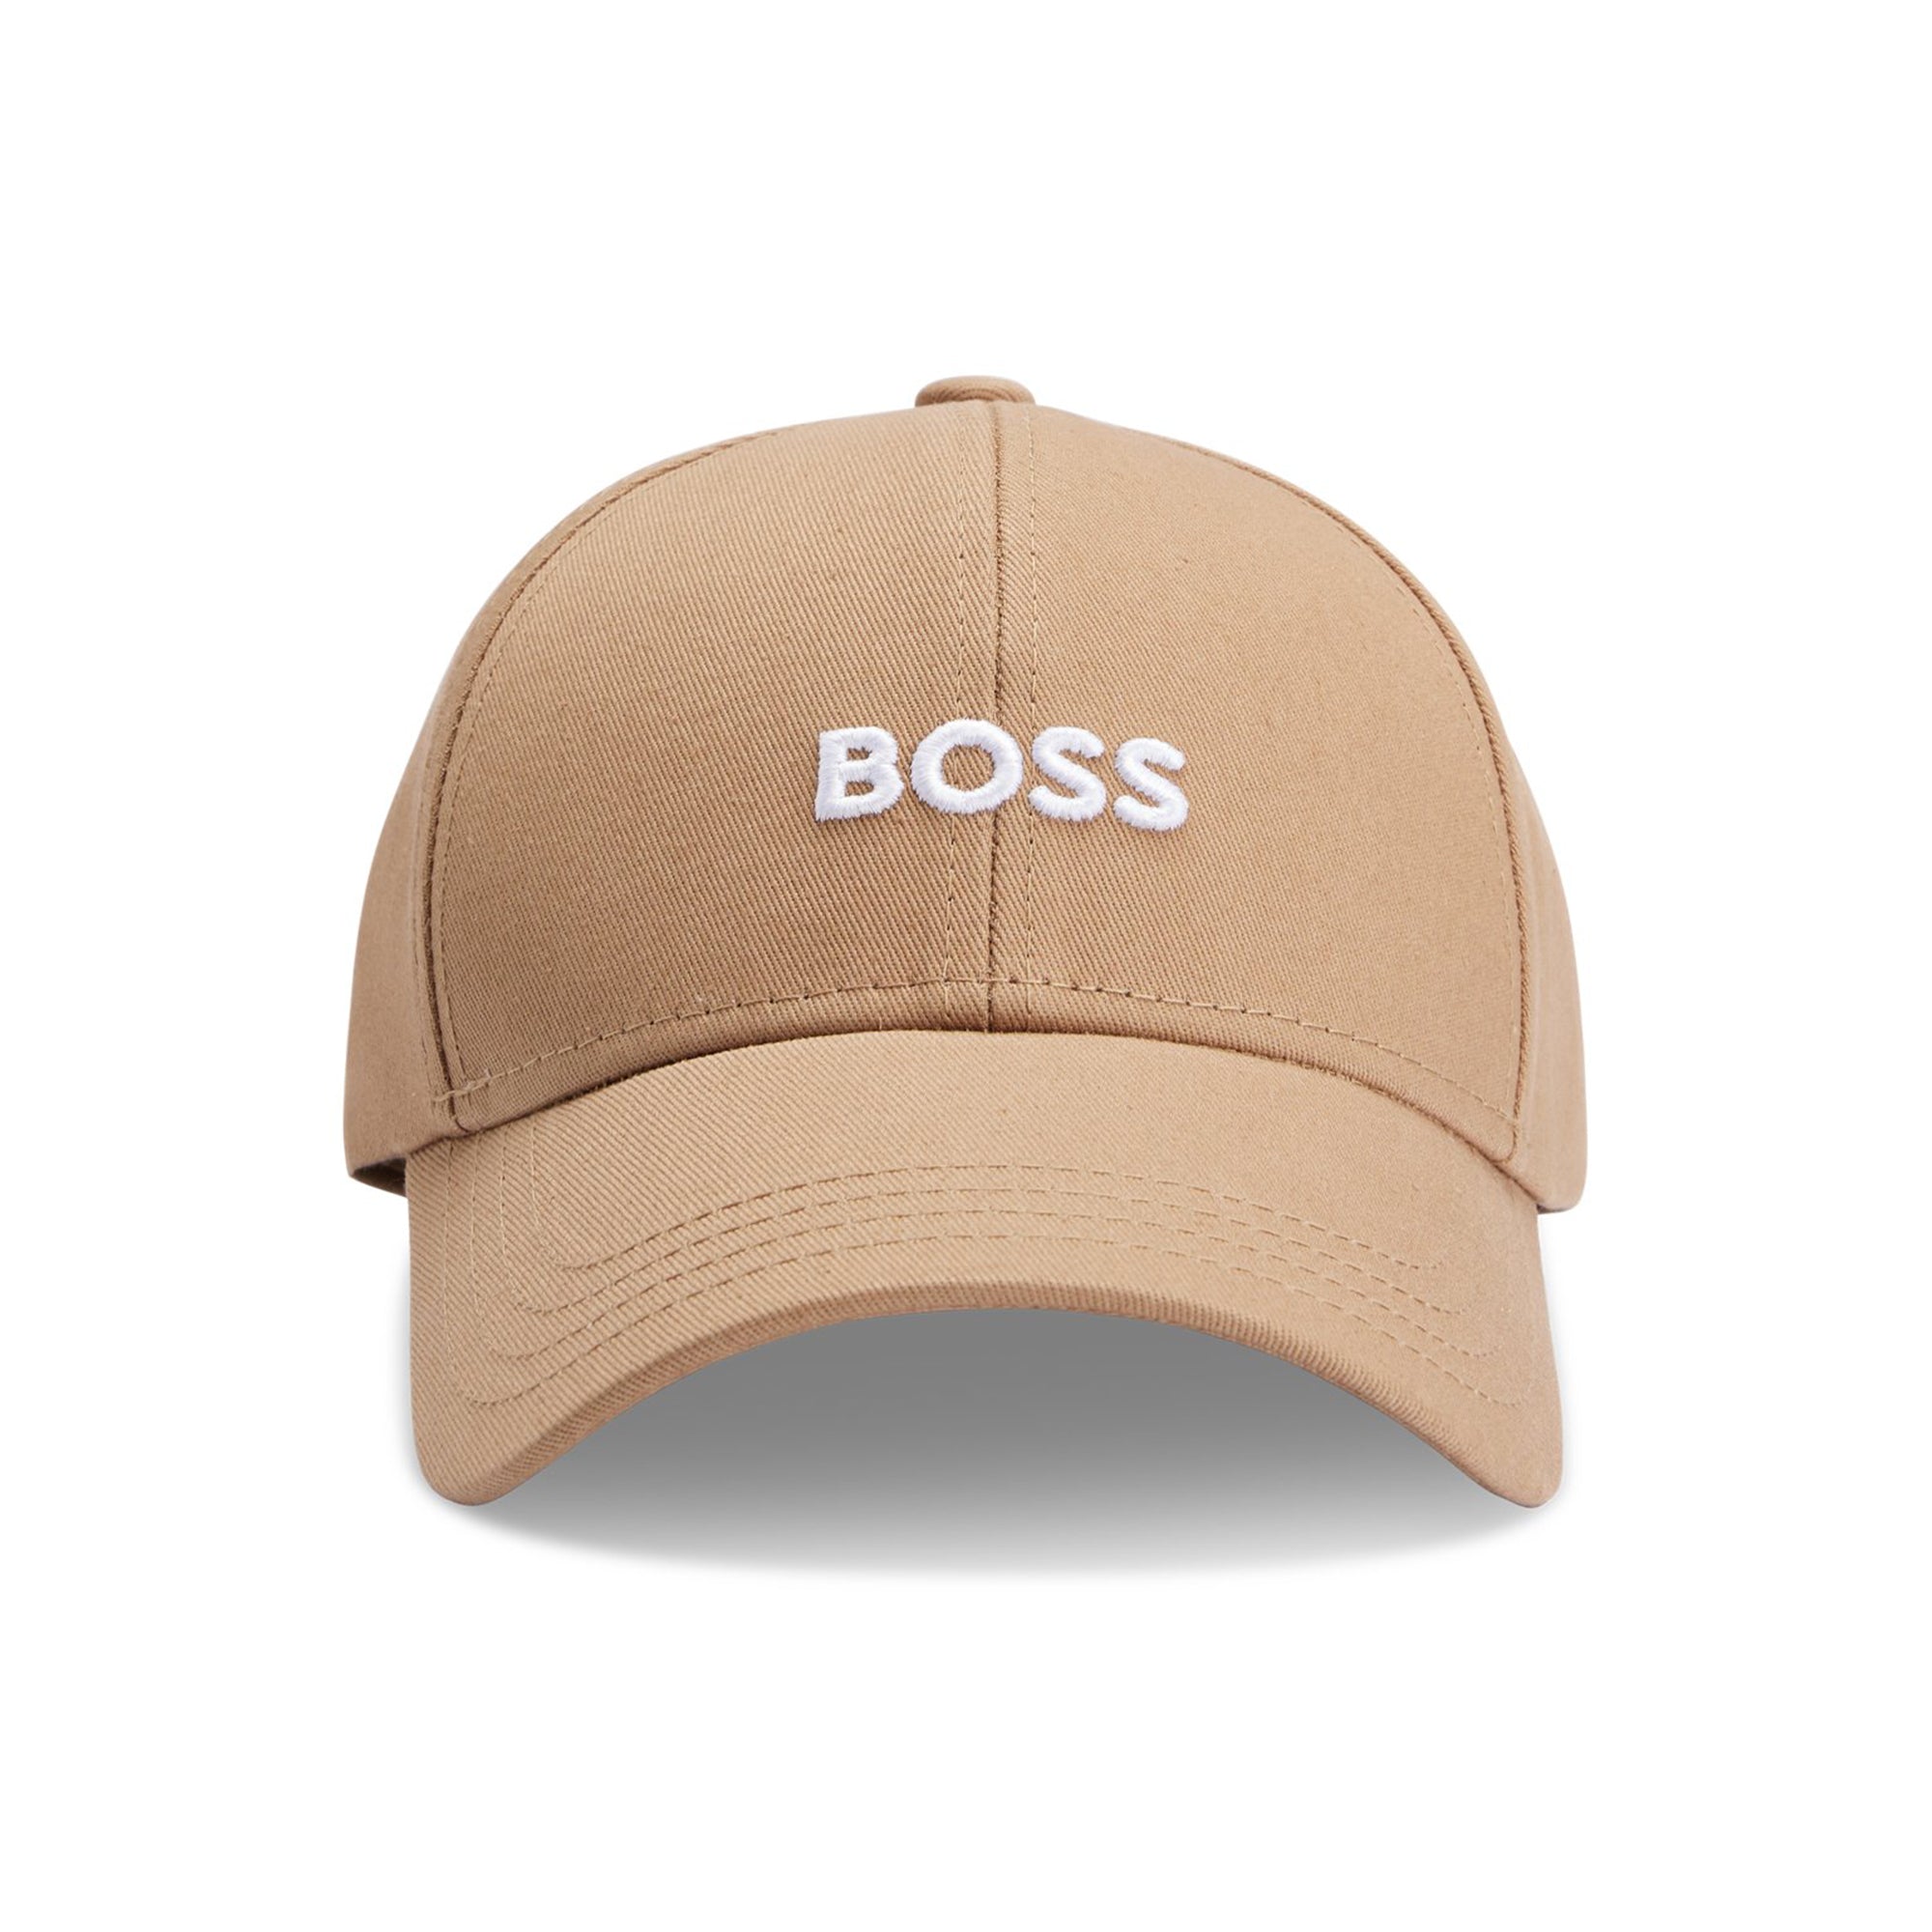 Boss Zed Embroidered Cotton Cap - Beige